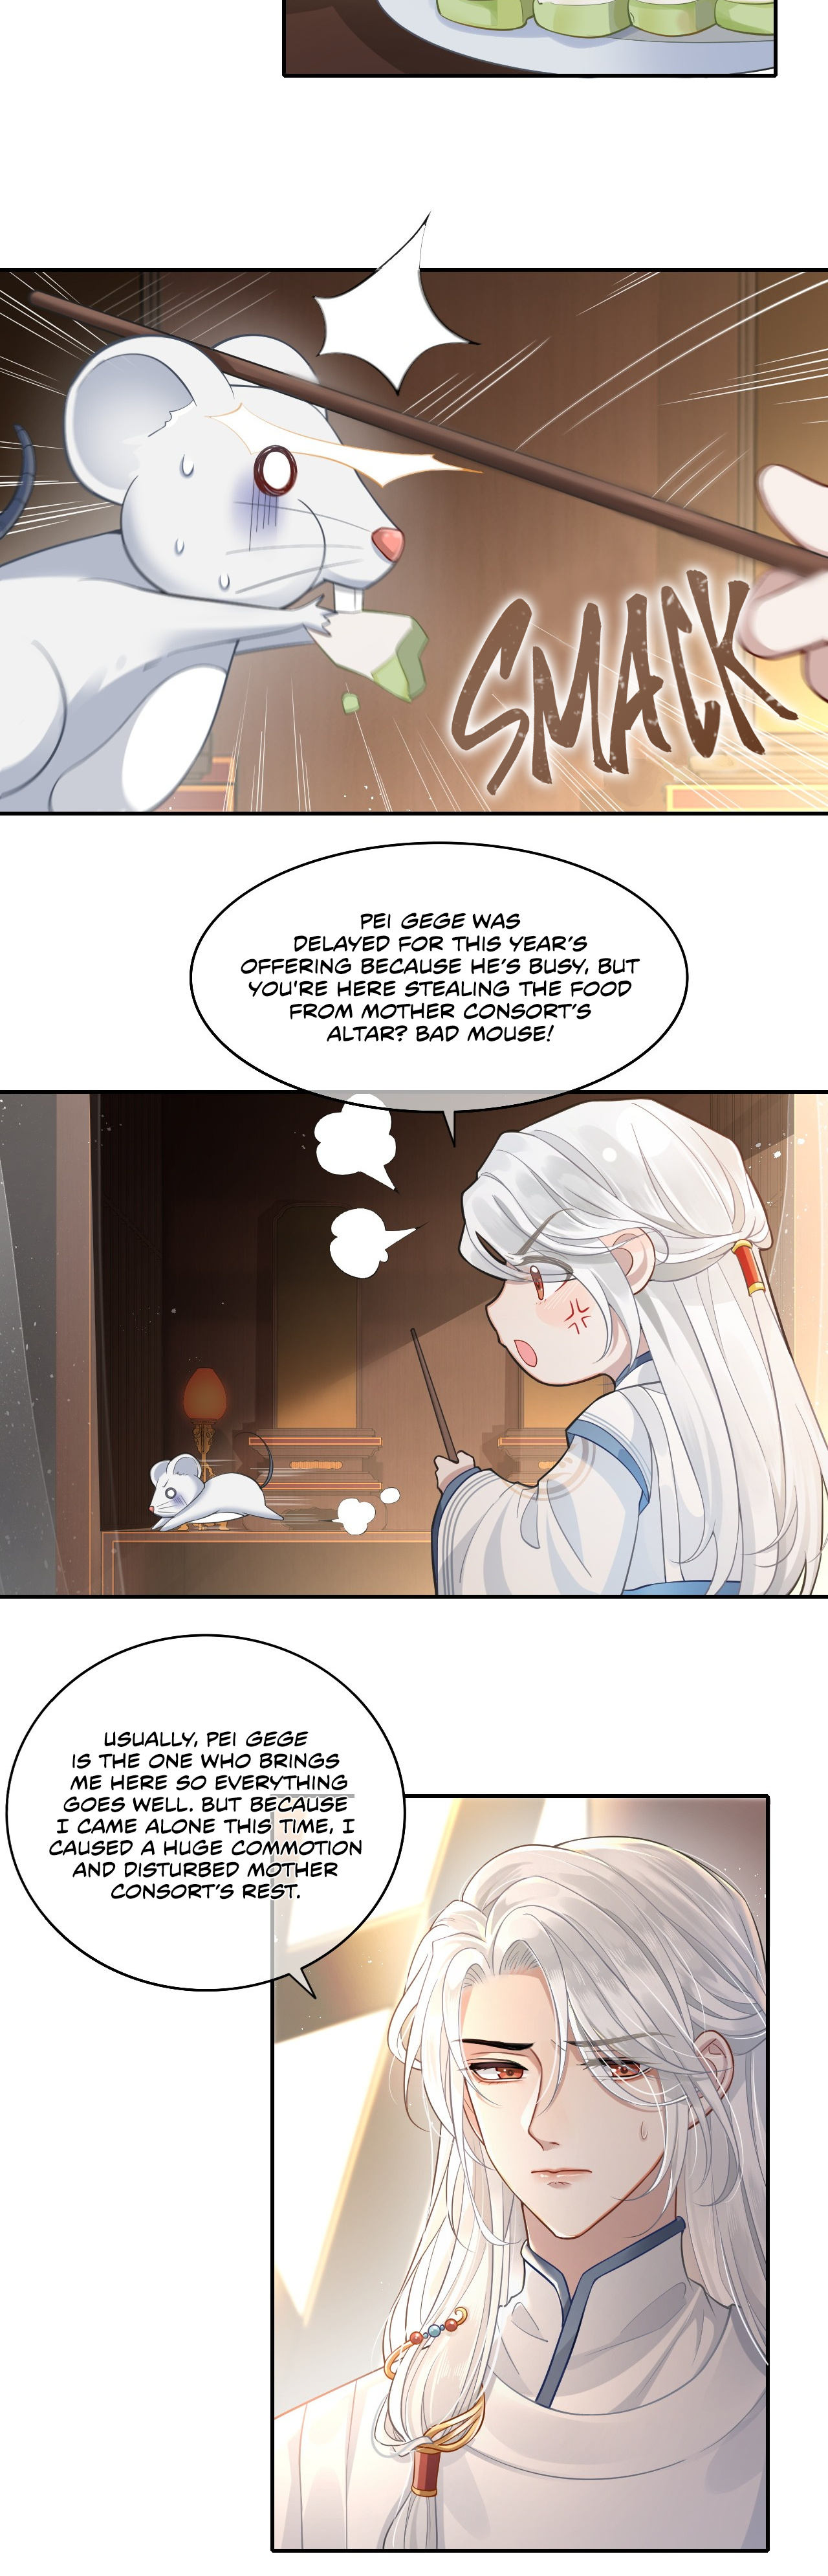 His Highness's Allure - Page 5